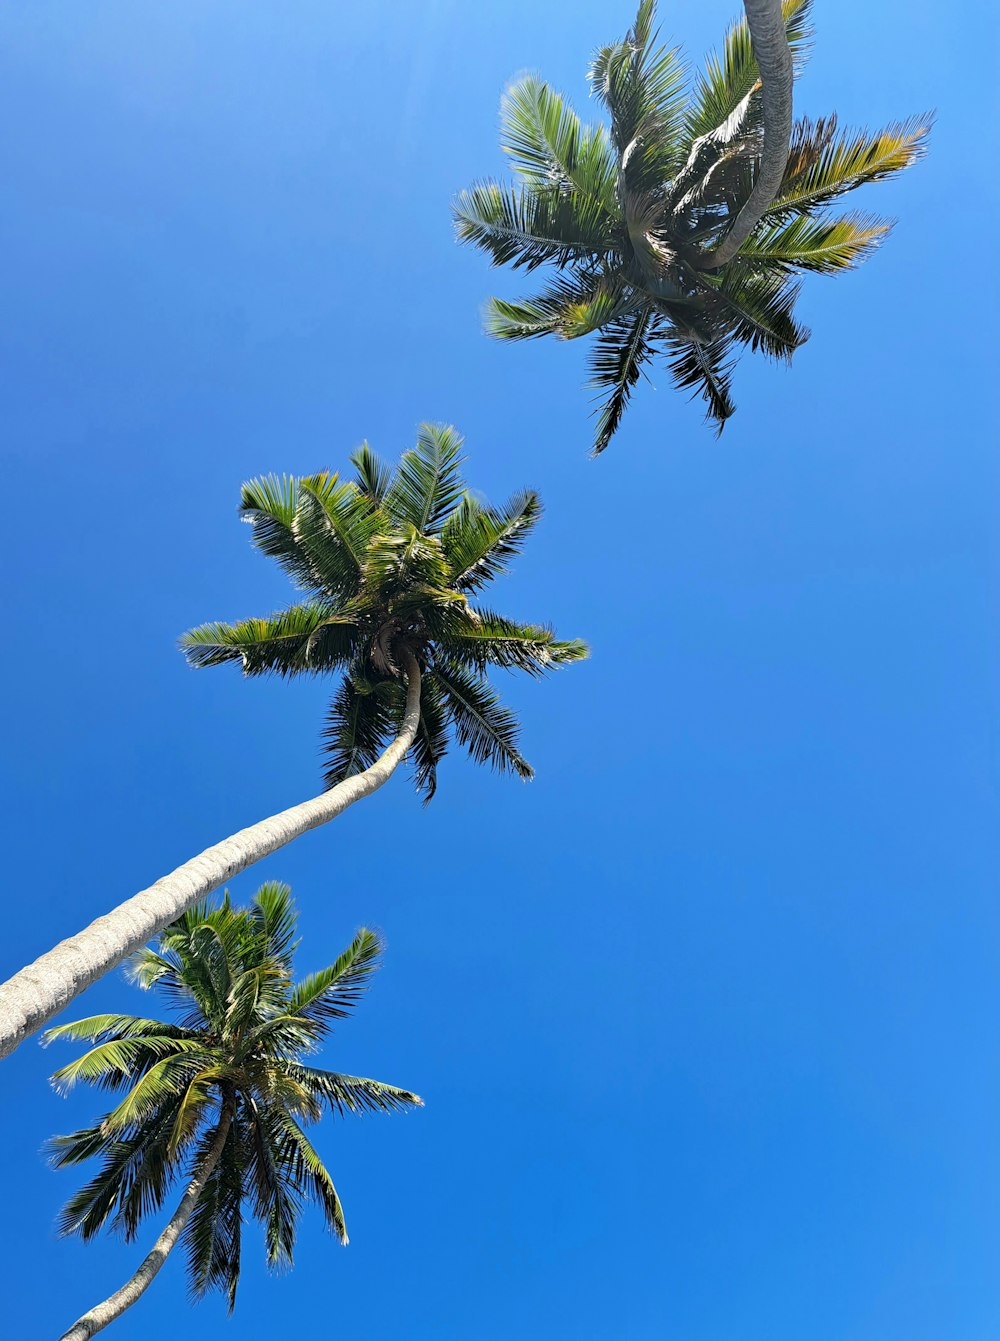 two palm trees reaching up into the blue sky